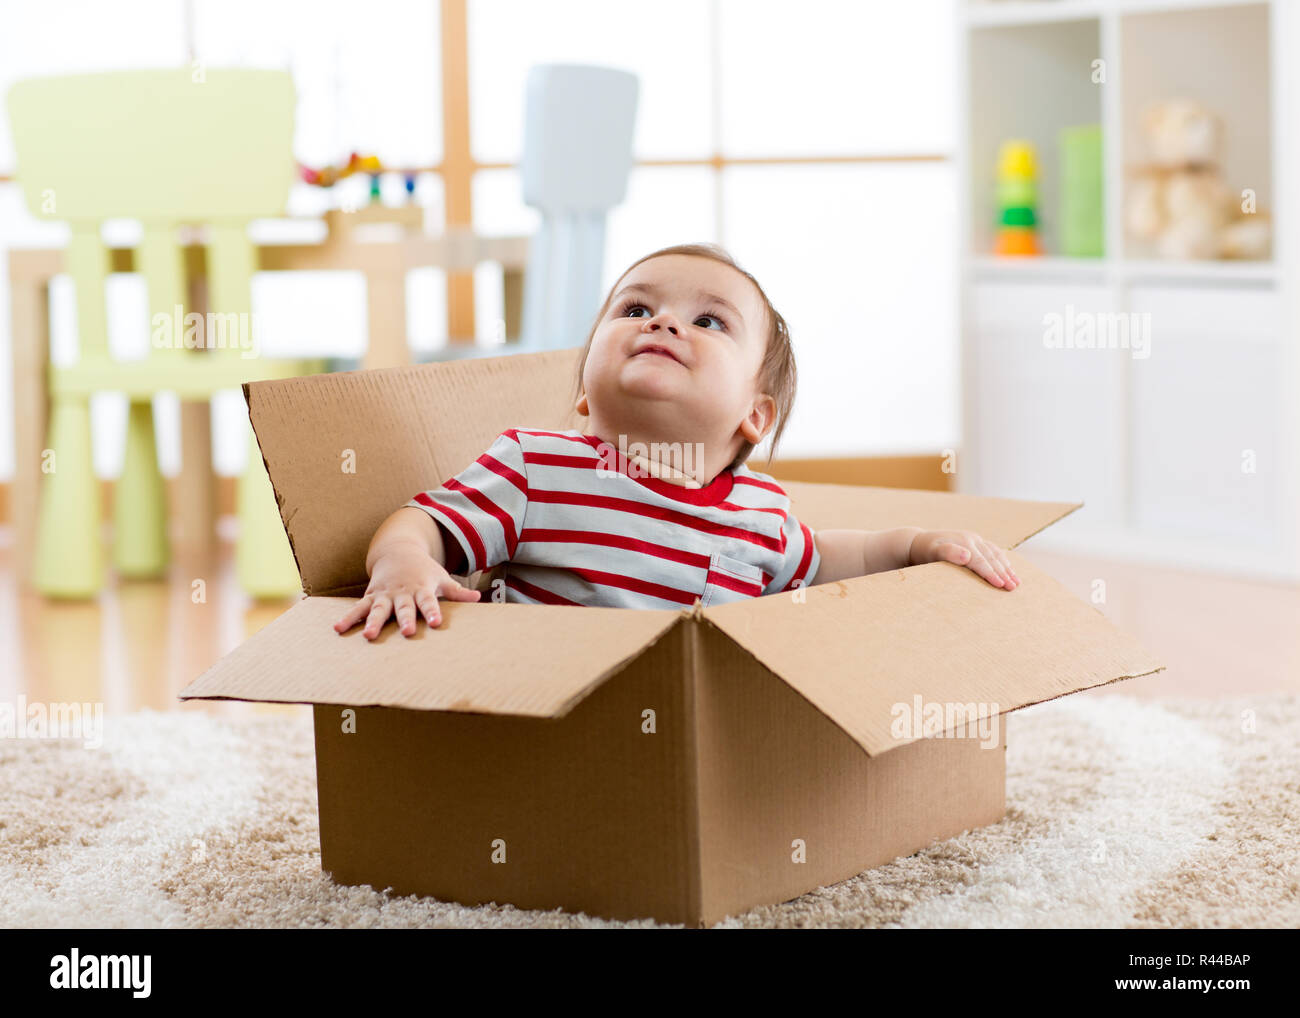 cute little baby infant boy sitting inside cardboard box, moving out concept Stock Photo